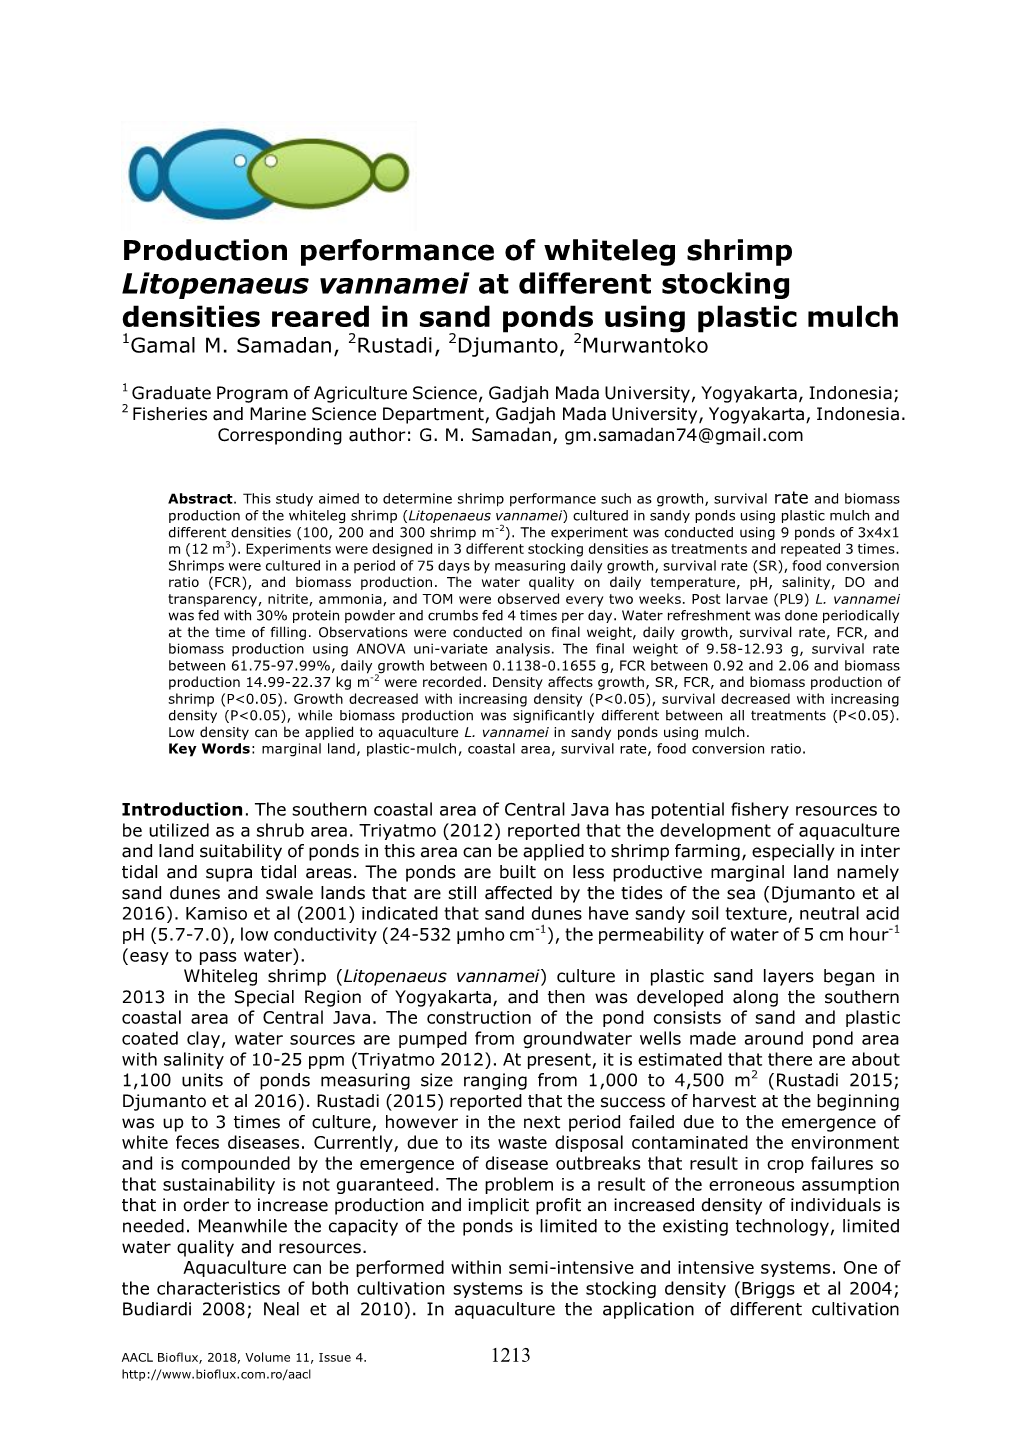 Production Performance of Whiteleg Shrimp Litopenaeus Vannamei at Different Stocking Densities Reared in Sand Ponds Using Plastic Mulch 1Gamal M